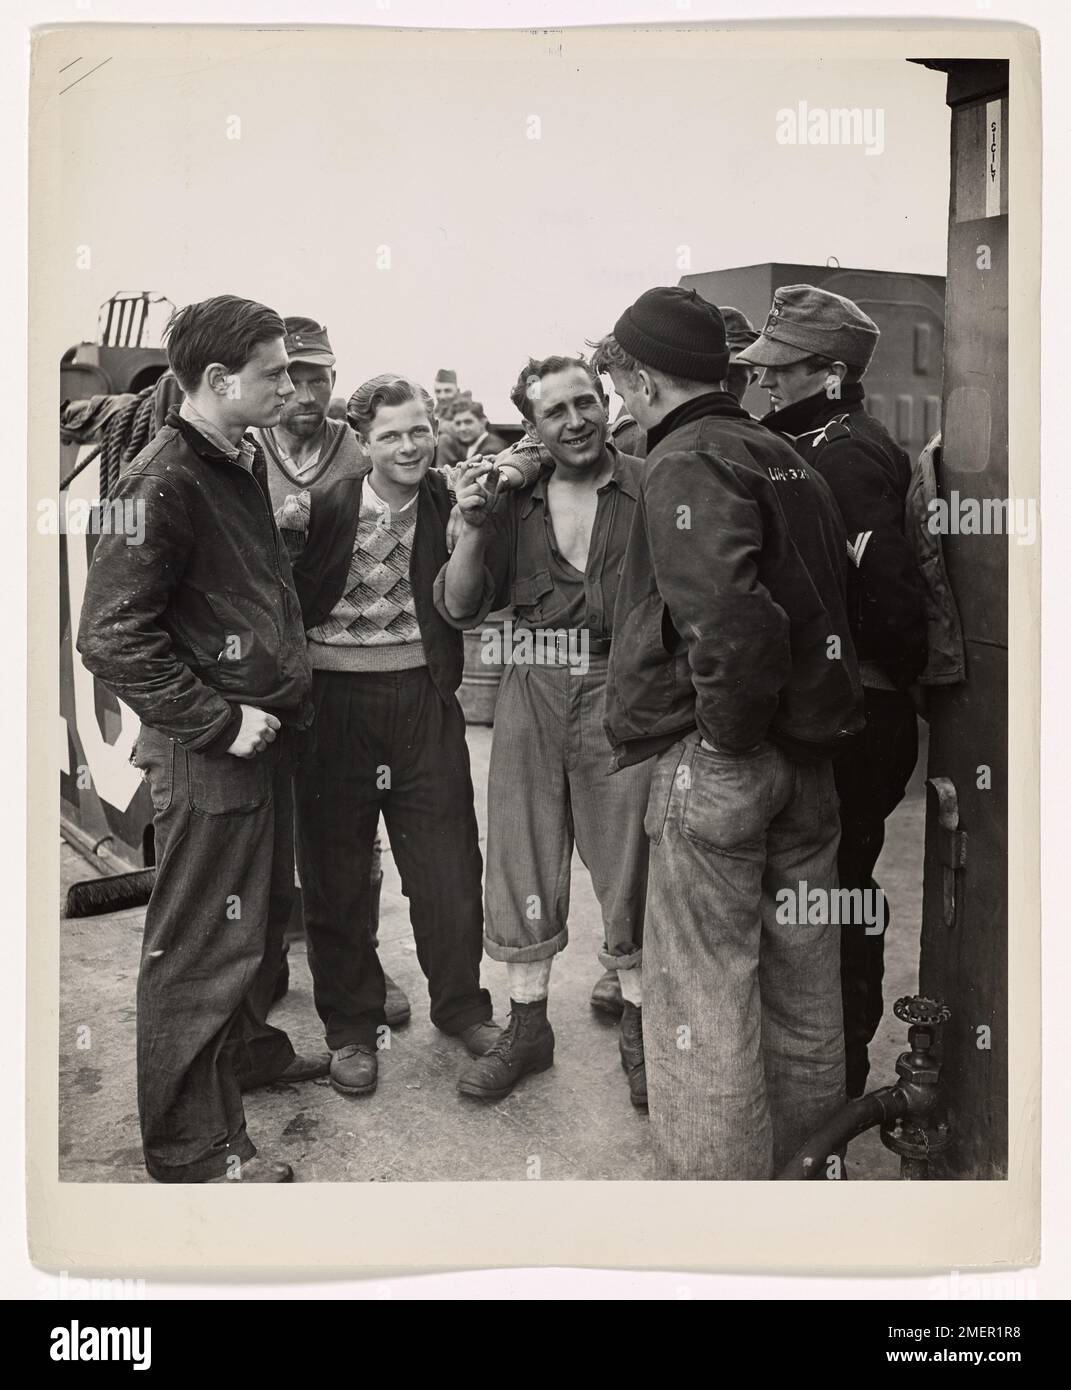 Photograph of Nazi Prisoners Chatting With Coast Guardsmen Aboard the Coast Guard-manned LCI Which Is Transporting Them from the French Coast to England and to a War Prisoner's Camp. Farewell to Arms for These Nazis. Seemingly far from displeased by their capture, Nazi prisoners chat with Coast Guardsmen aboard the Coast Guard-manned LCI which is transporting them from the French coast to England and to a war prisoner's camp. These Coast Guardsmen are: Allen Aylward (left), Radioman Third Class, of Beverly, Mass., and Harold Goodwin (right), back to camera), Signal Man Second Class of Fort Wor Stock Photo